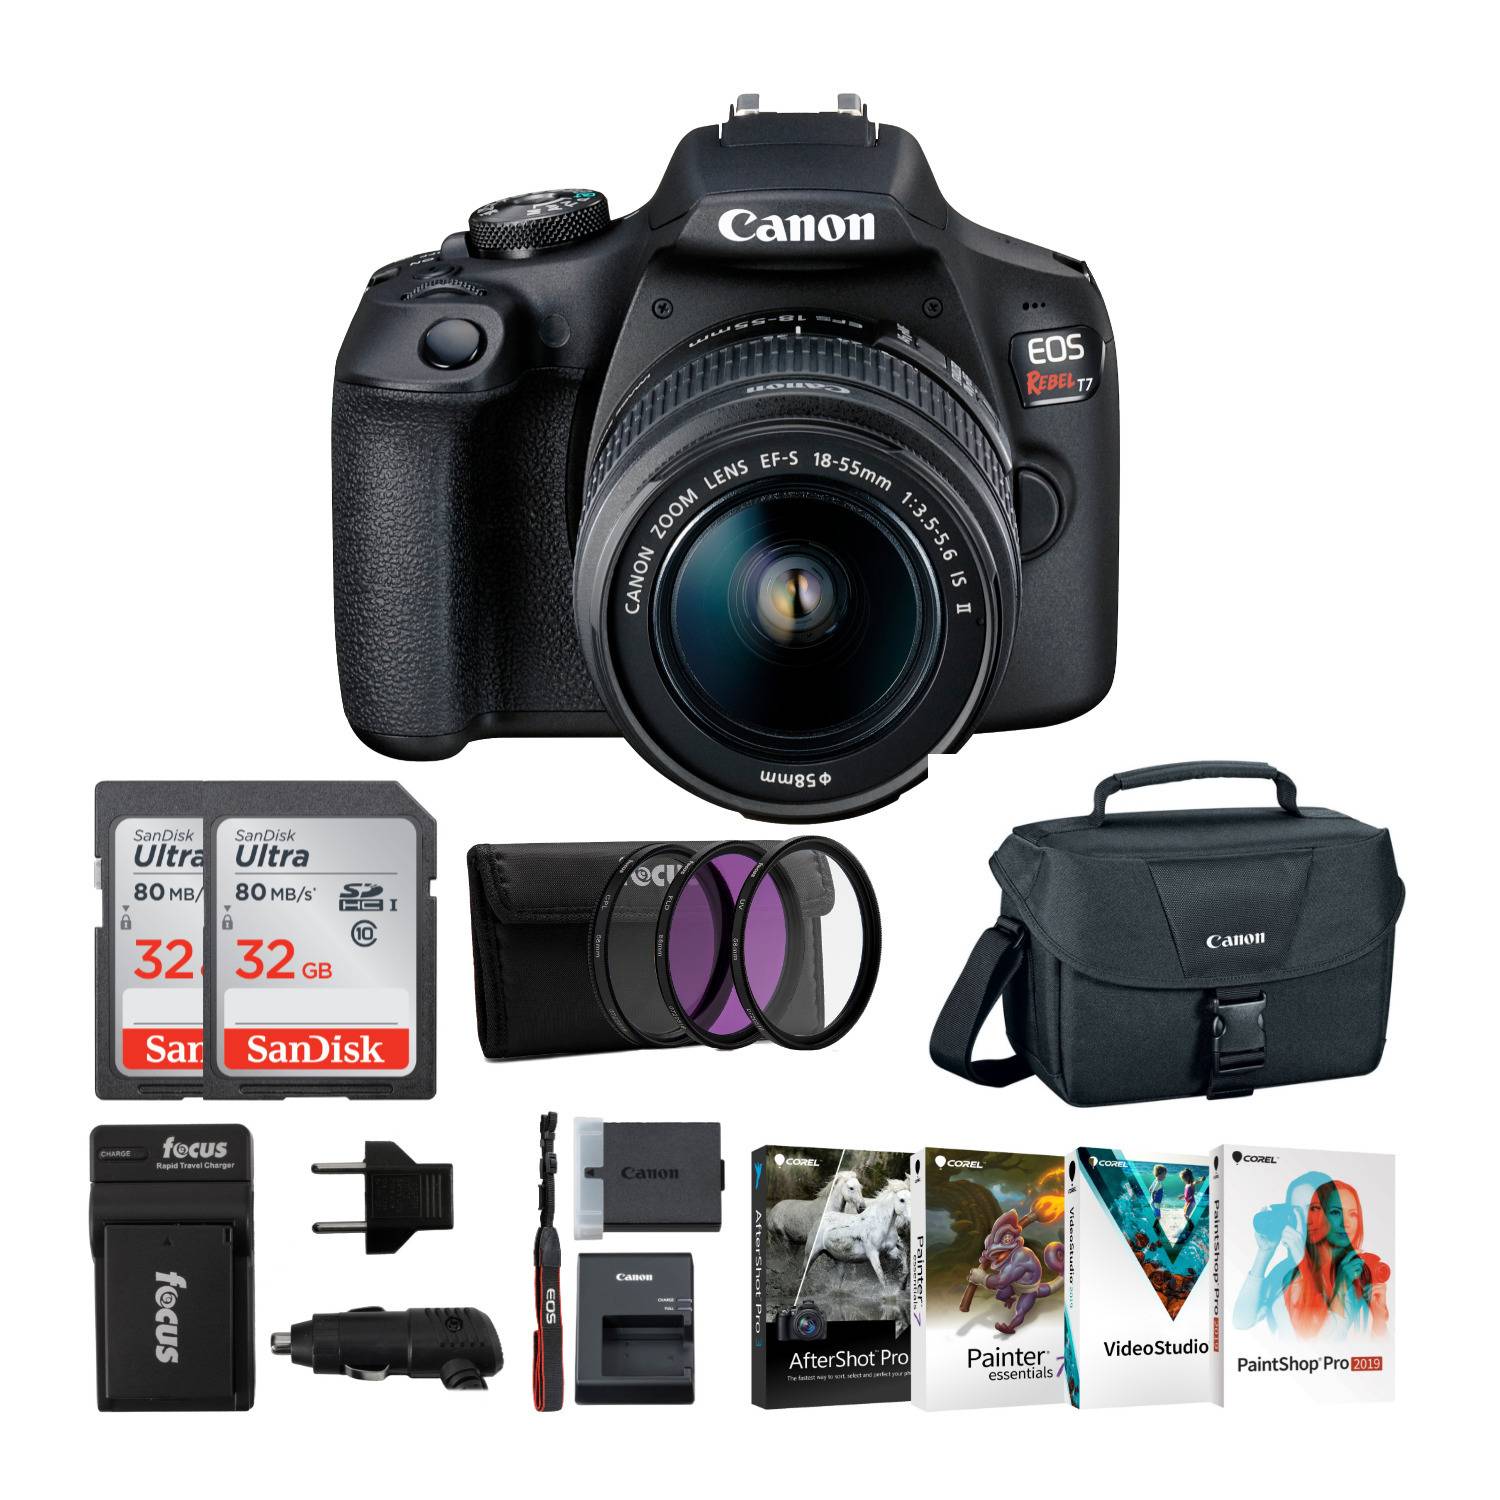 Canon EOS Rebel T7 DSLR Camera with EF-S 18-55mm IS II Lens Kit, 64 GB and Spare Battery Bundle